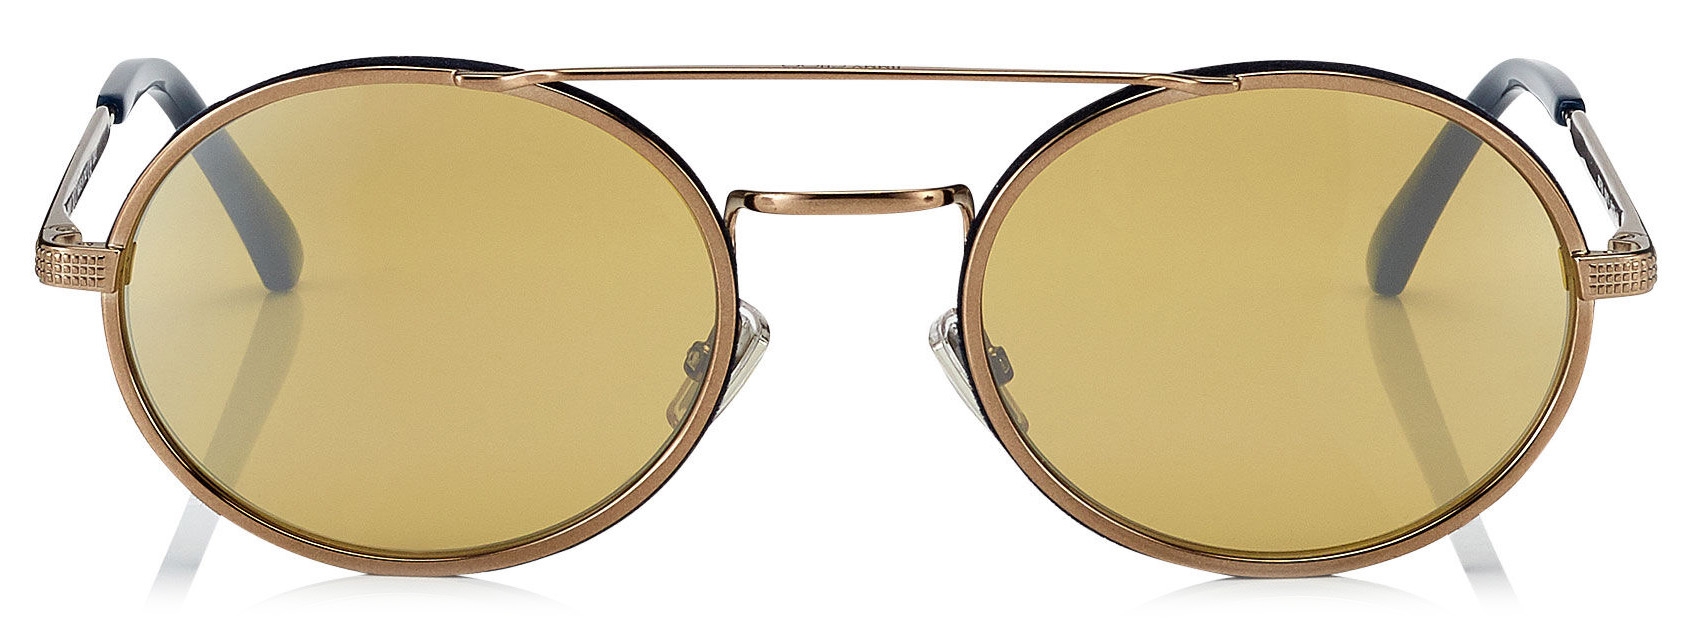 Jimmy Choo - Jeff - Silver Mirror Oval Sunglasses with Bronze Metal Frame  and Blue Temple Ends - Avvenice